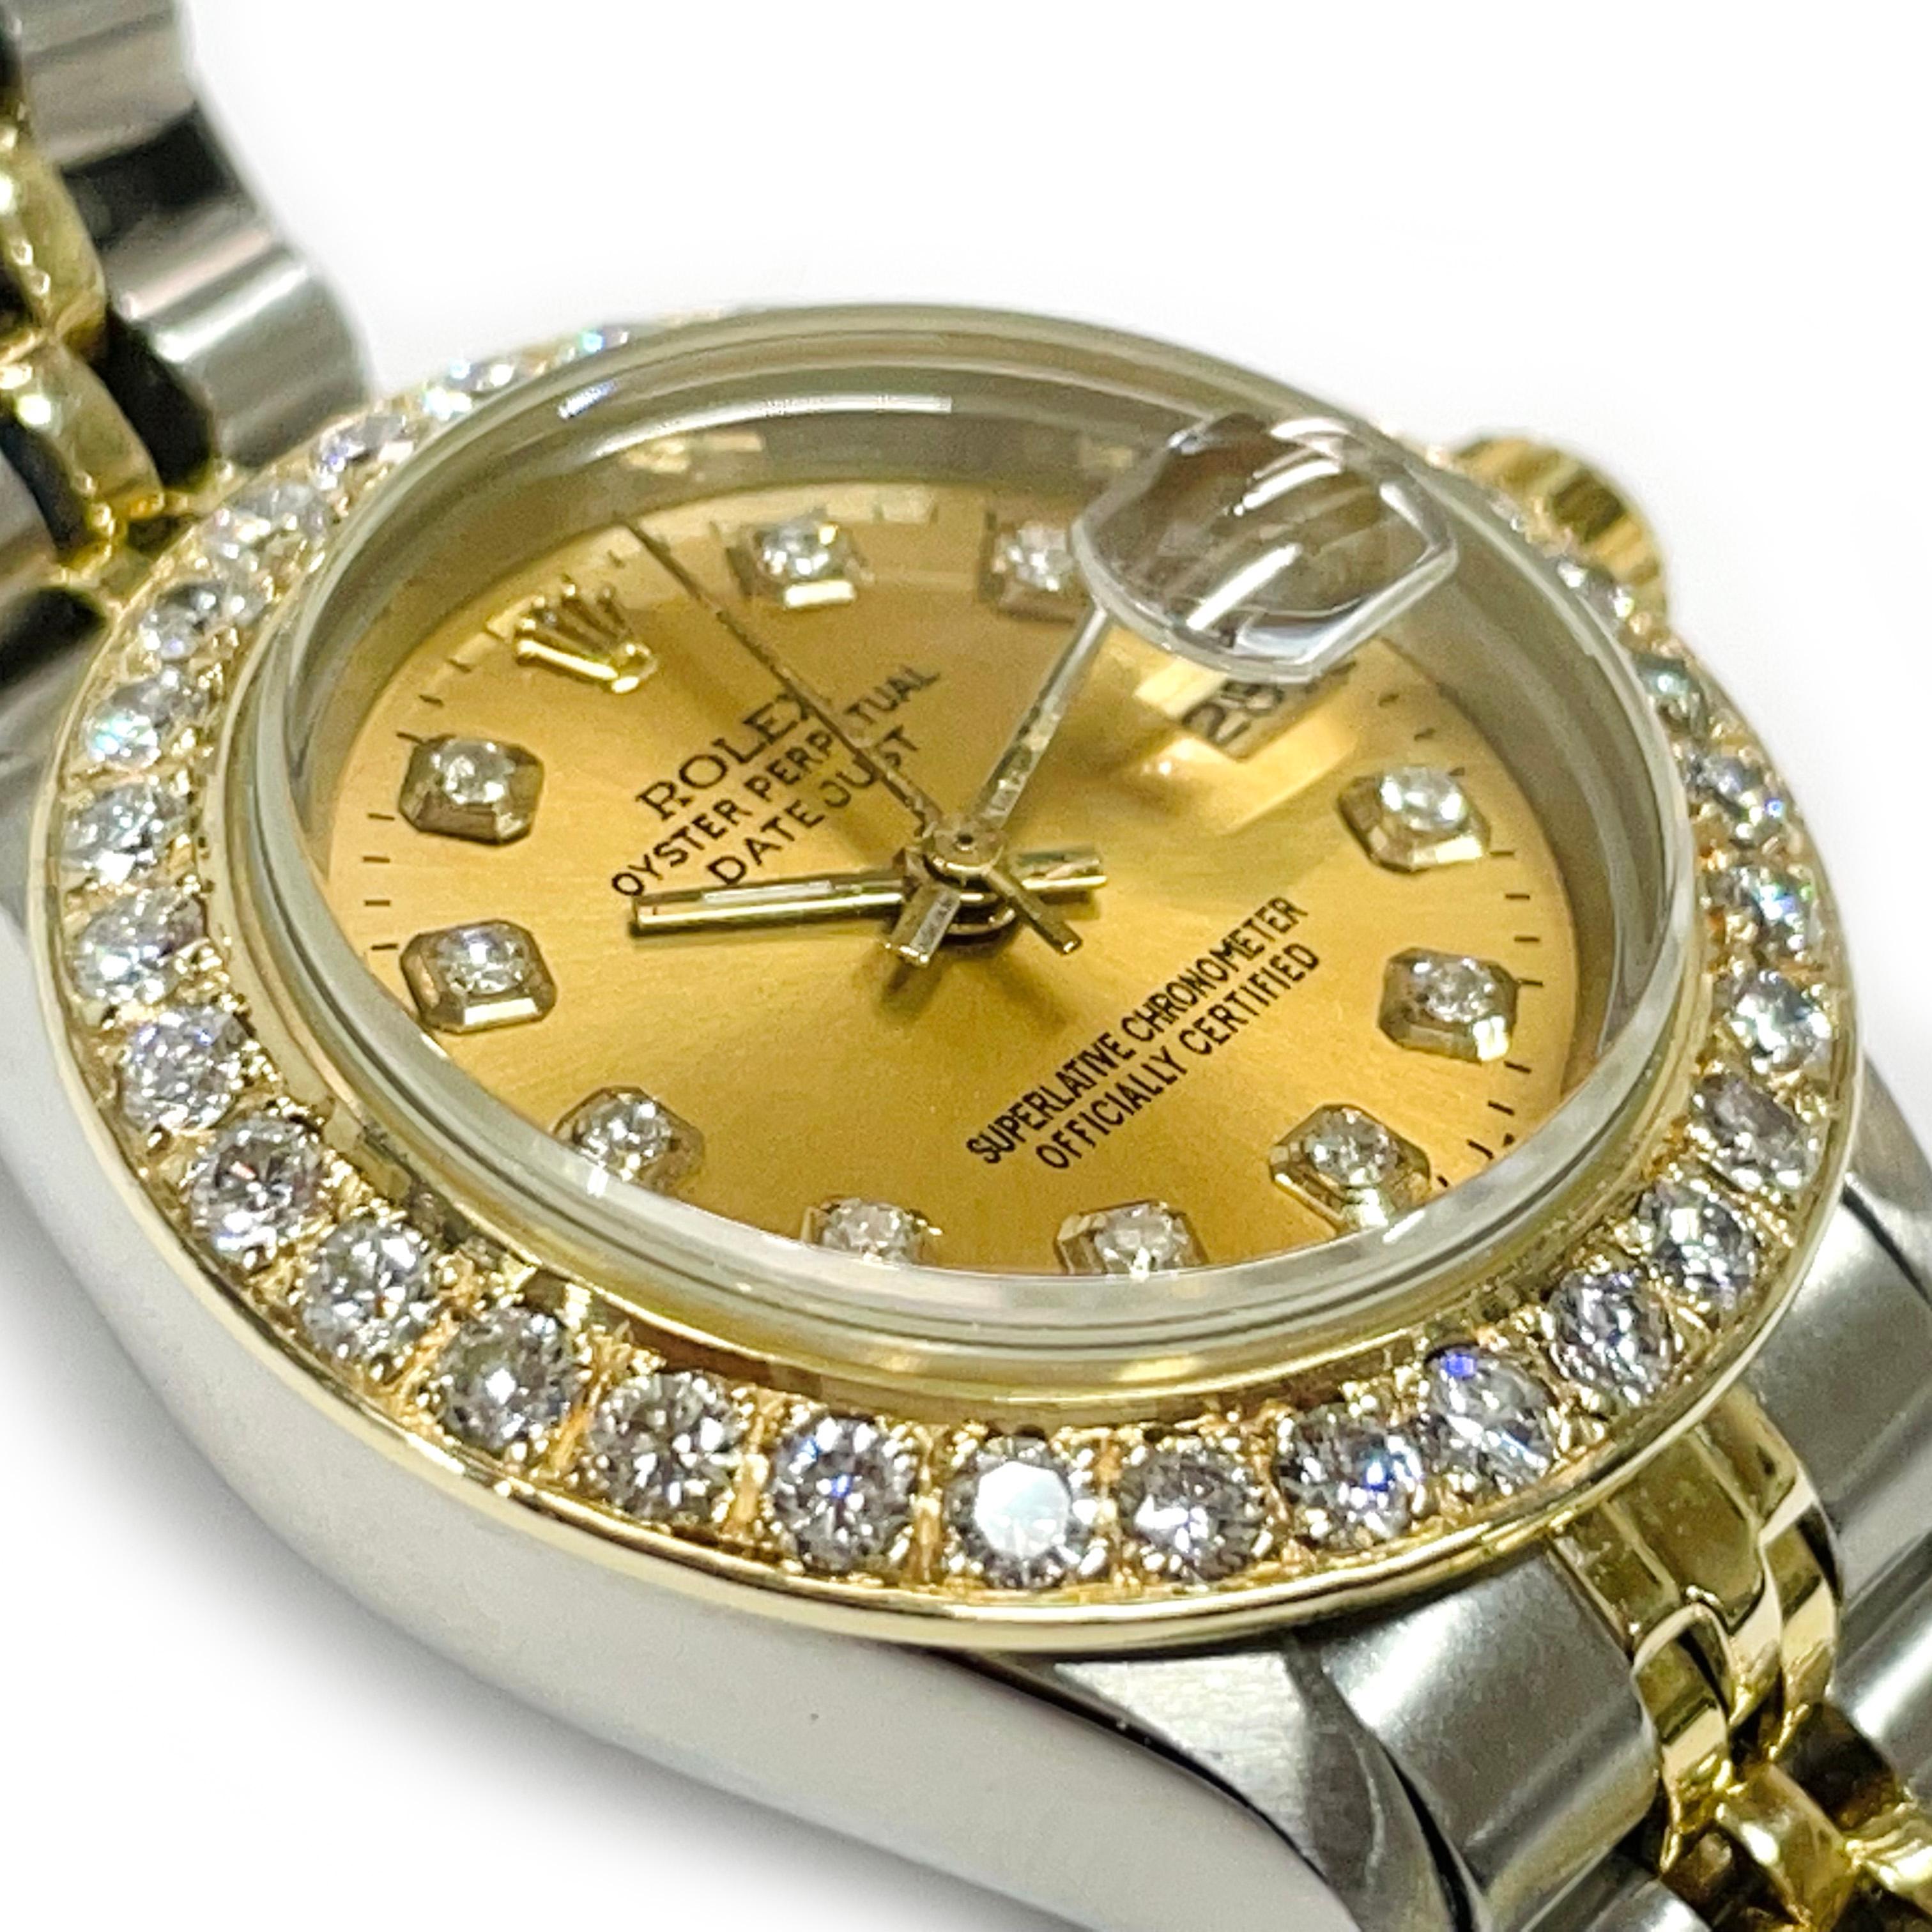 Ladies Two-Tone Rolex Oyster Perpetual Datejust Diamond Bezel Watch. Absolutely exquisite wrist watch with a gold dial, hour, minute, and second hand, diamond hours, and diamond bezel. There are thirty-two 2.1mm round pave-set diamonds set on the